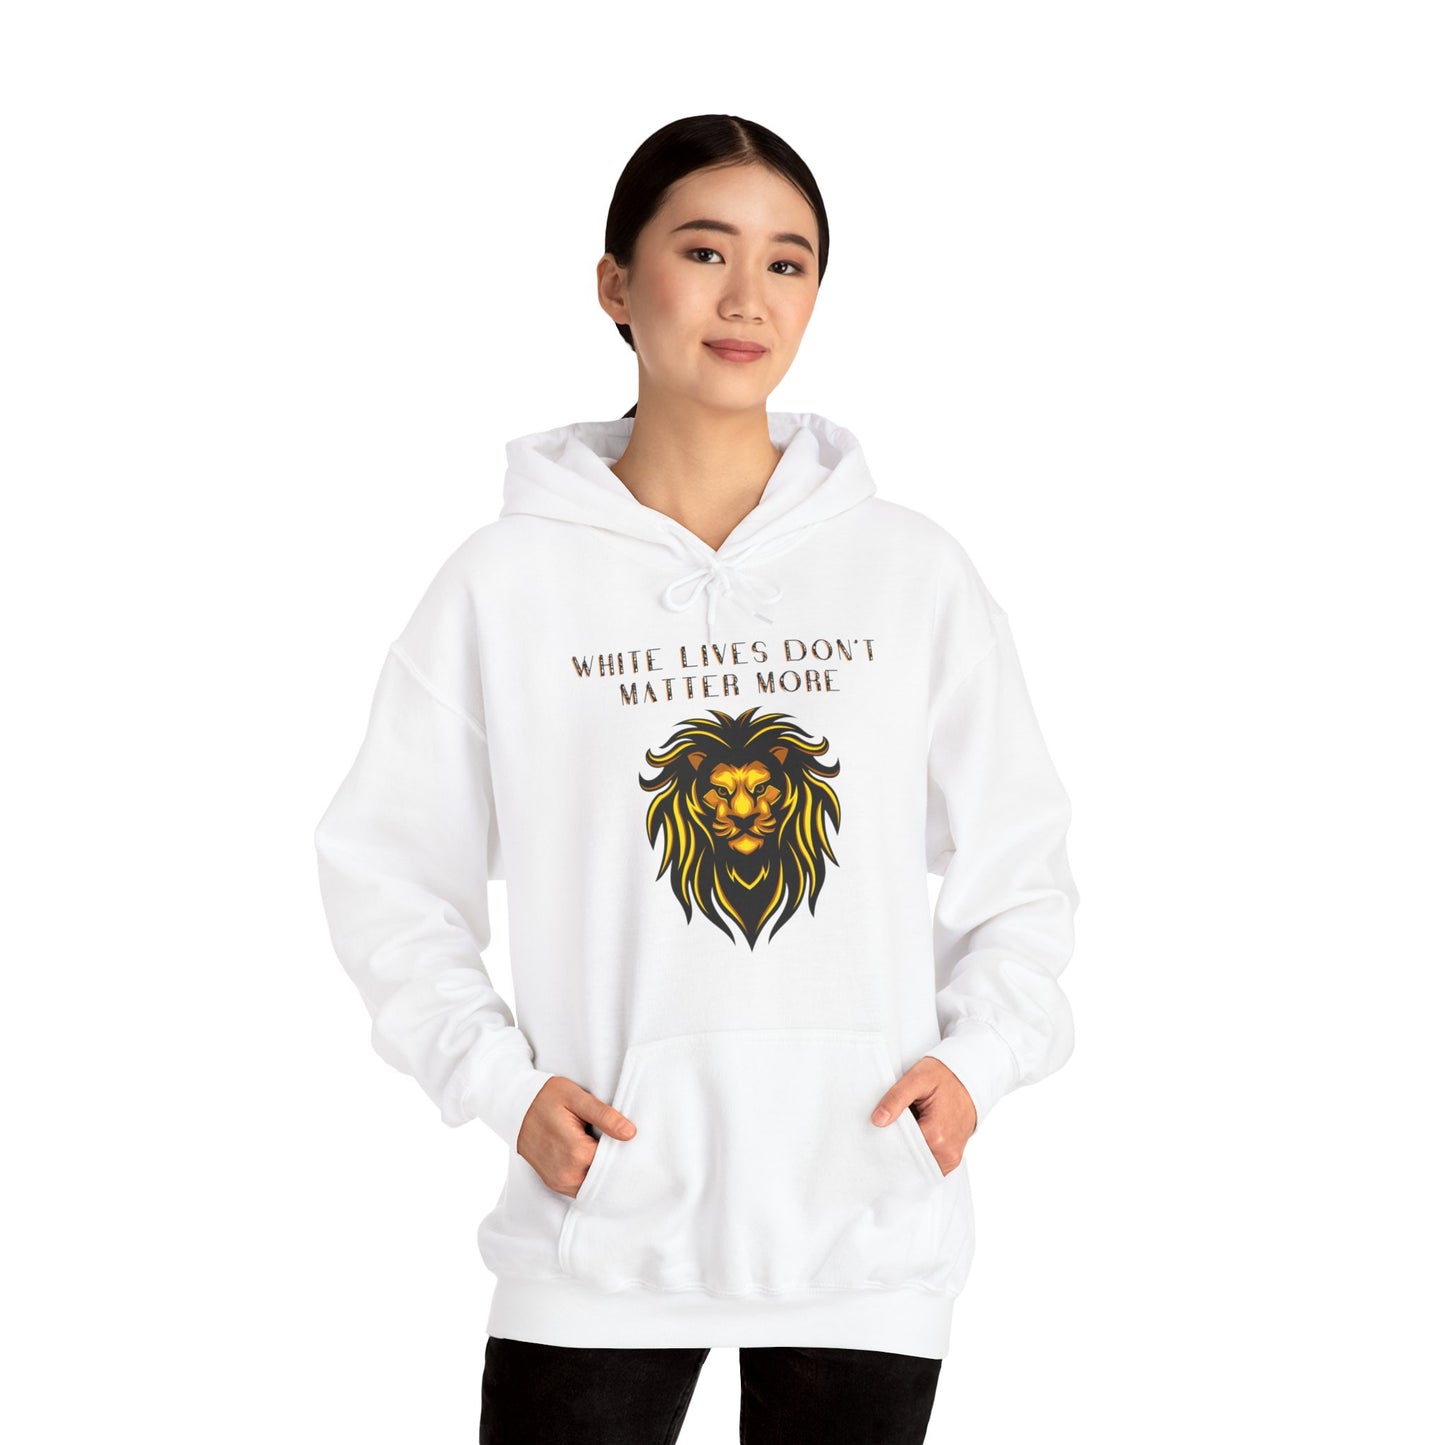 "White Lives Don't Matter More" Hooded Heavyweight Sweatshirt with Bold Black Text and Lion Graphic